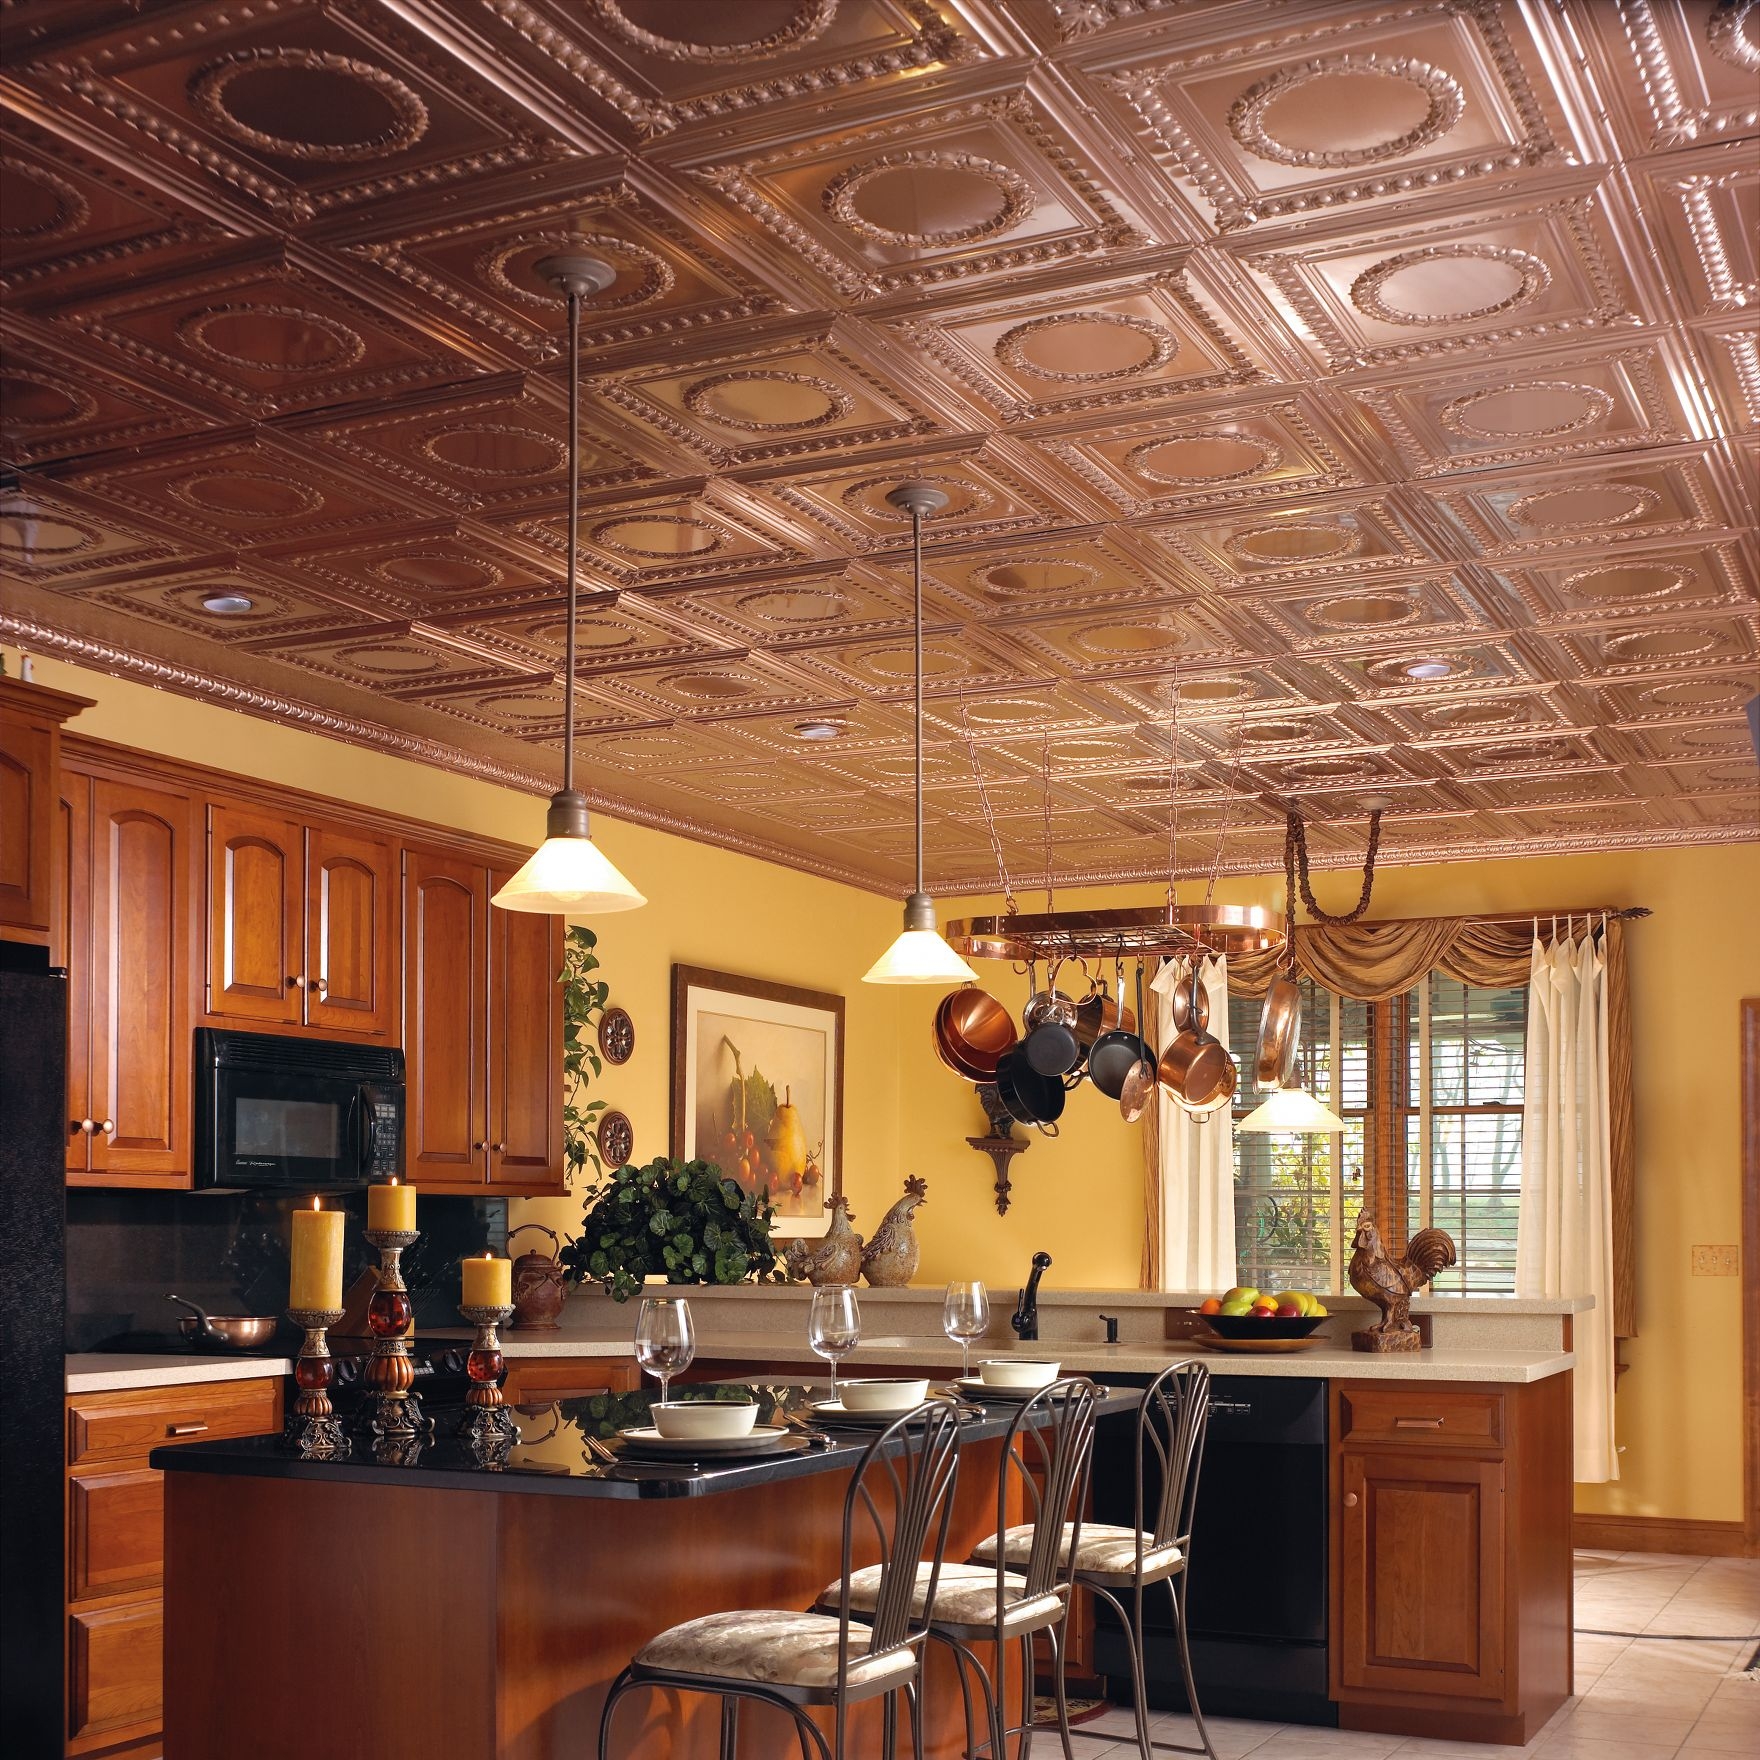 Armstrong Ceiling Tiles For Restaurants Armstrong Ceiling Tiles For Restaurants ceiling ideas ceiling design armstrong ideas for the house 1760 X 1760